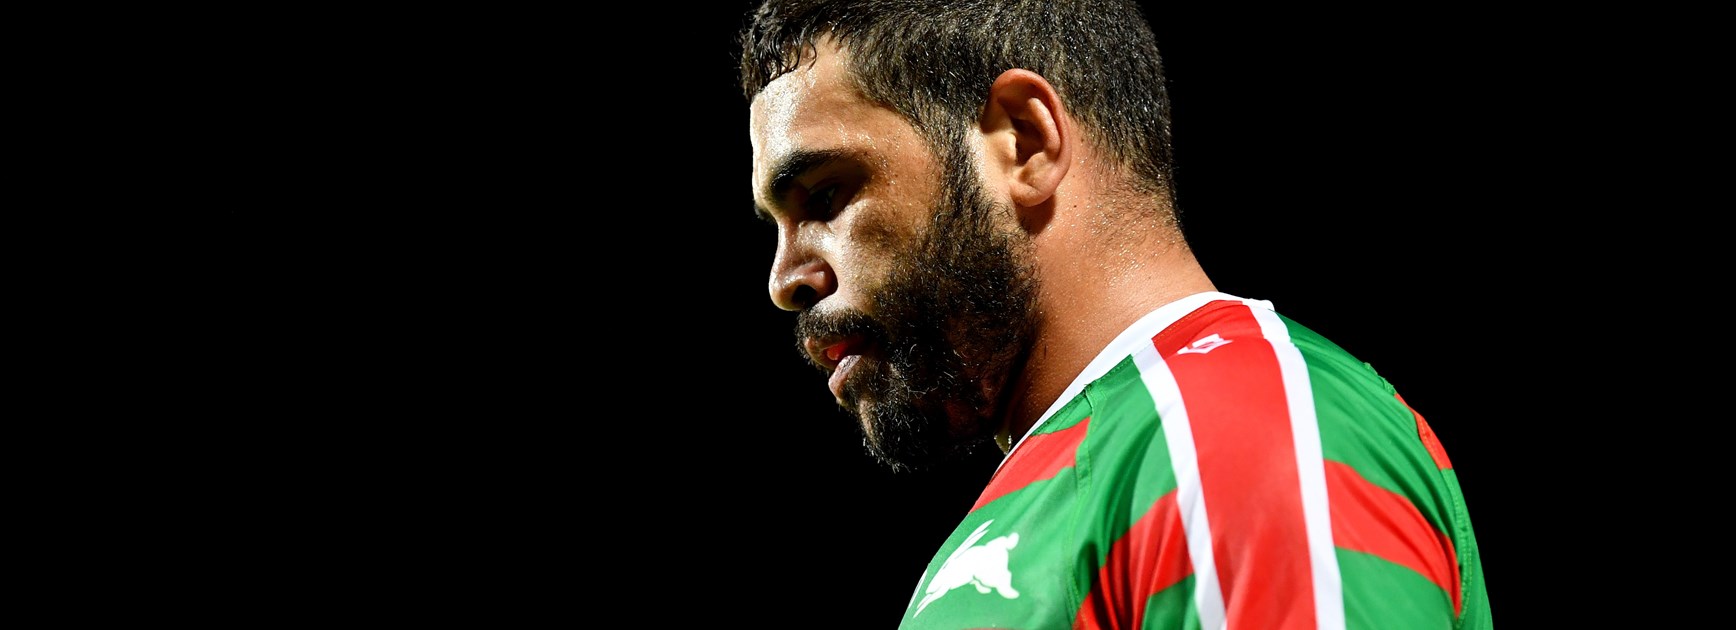 South Sydney won't give Inglis any more injections